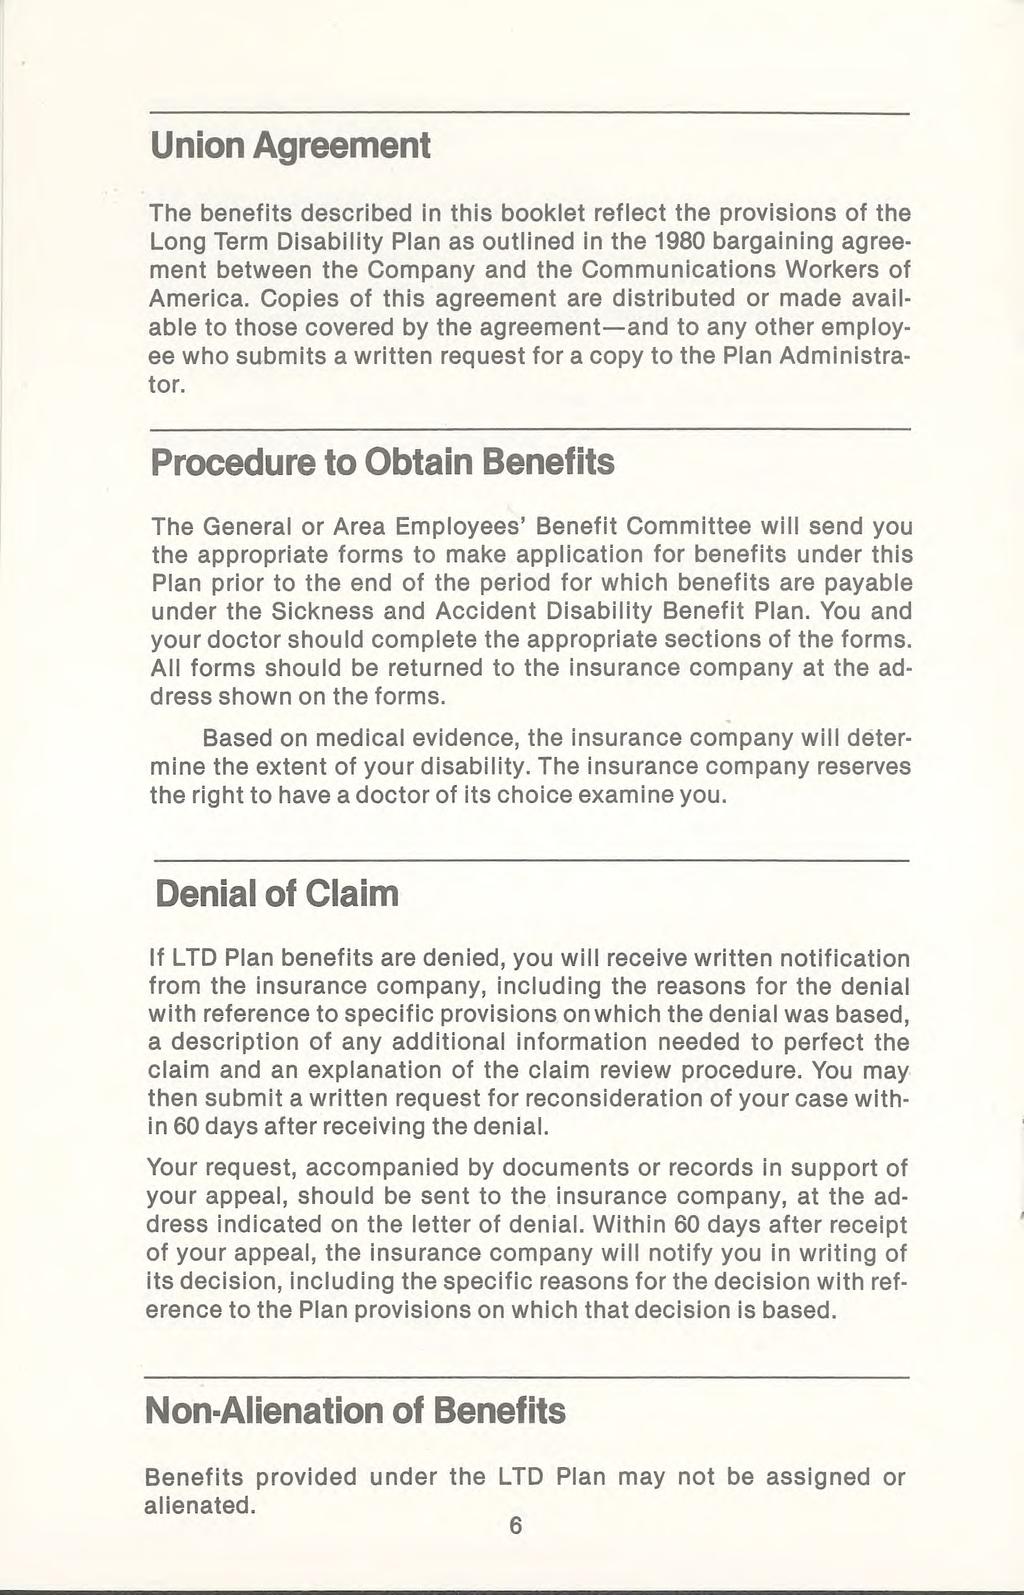 Union Agreement The benefits described in this booklet reflect the provisions of the Long Term Disability Plan as outlined in the 1980 bargaining agreement between the Company and the Communications